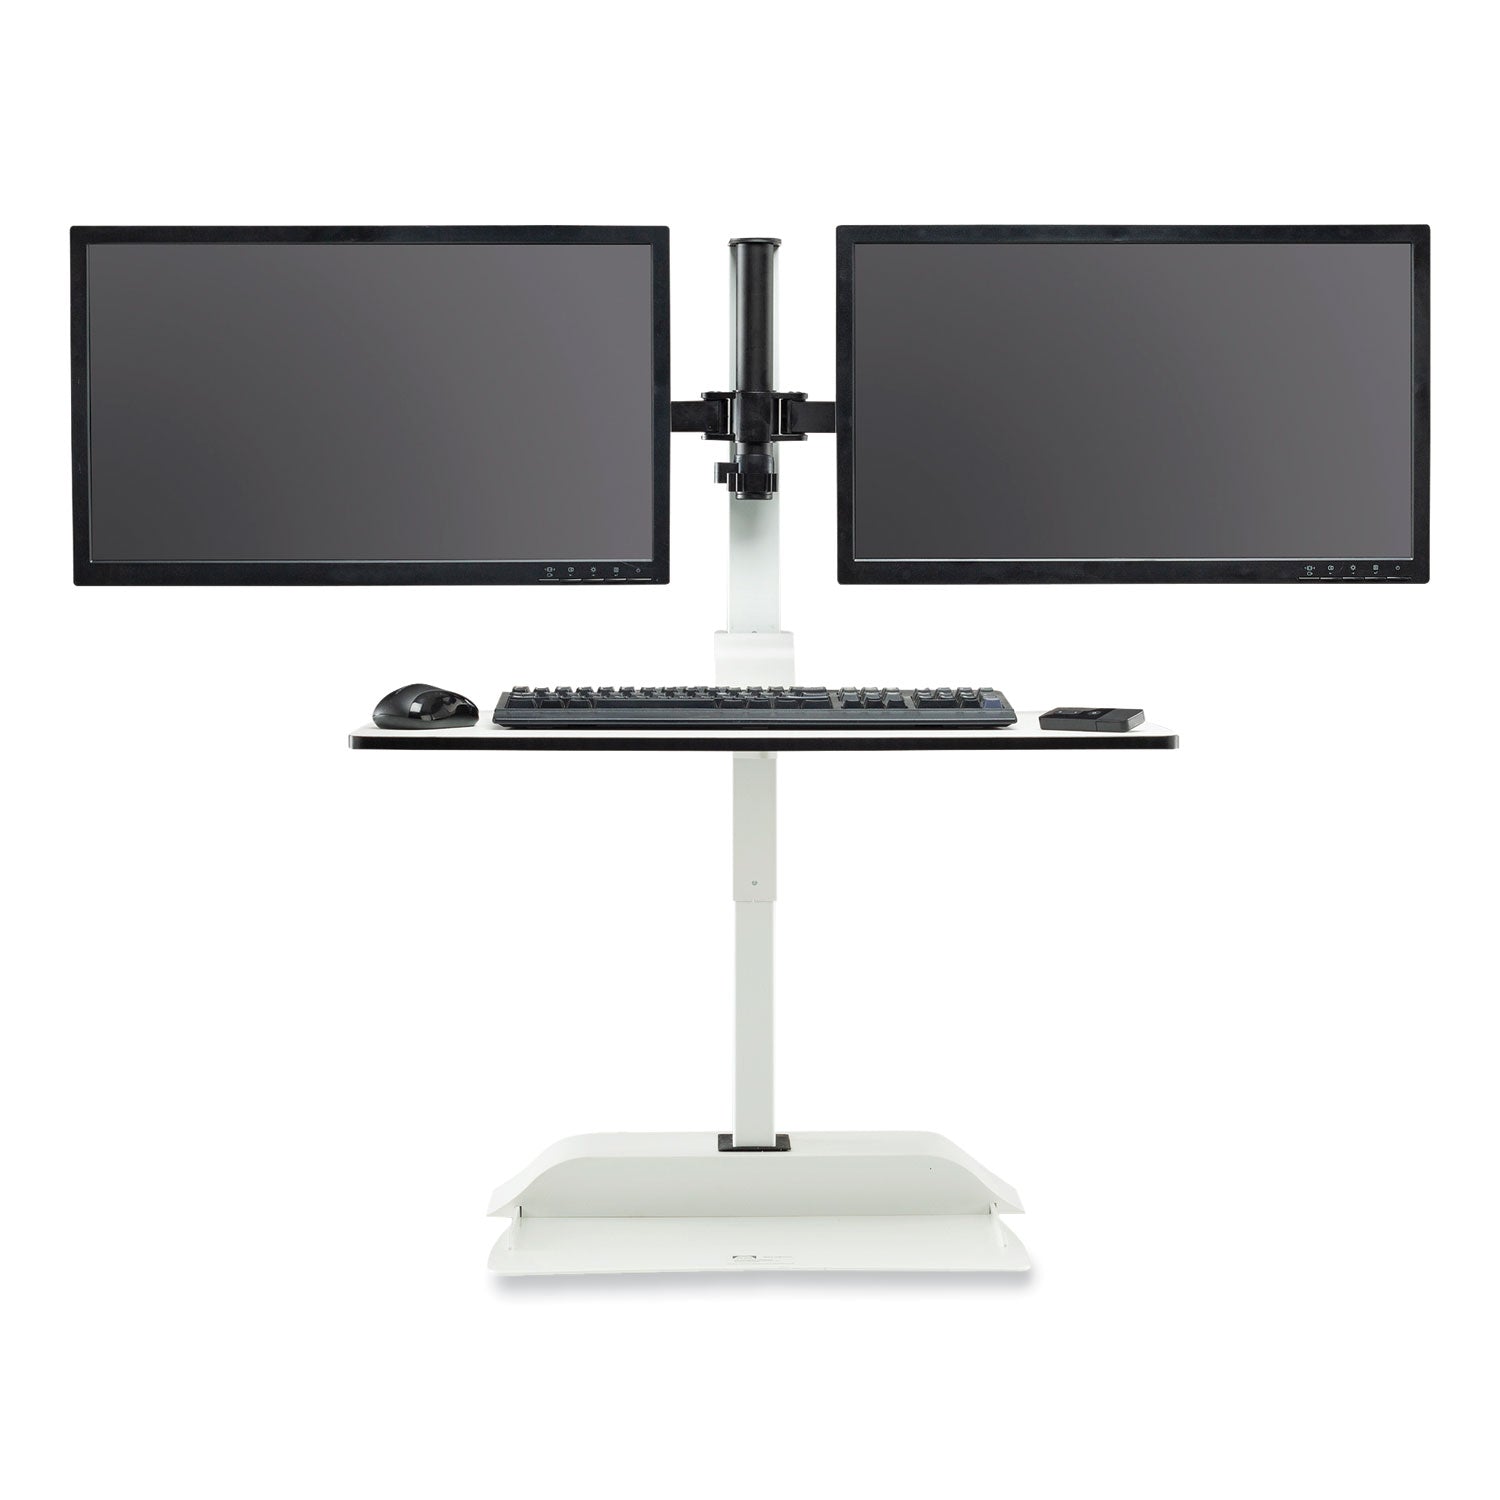 soar-electric-desktop-sit-stand-dual-monitor-arm-for-27-monitors-white-supports-10-lbs-ships-in-1-3-business-days_saf2193wh - 5